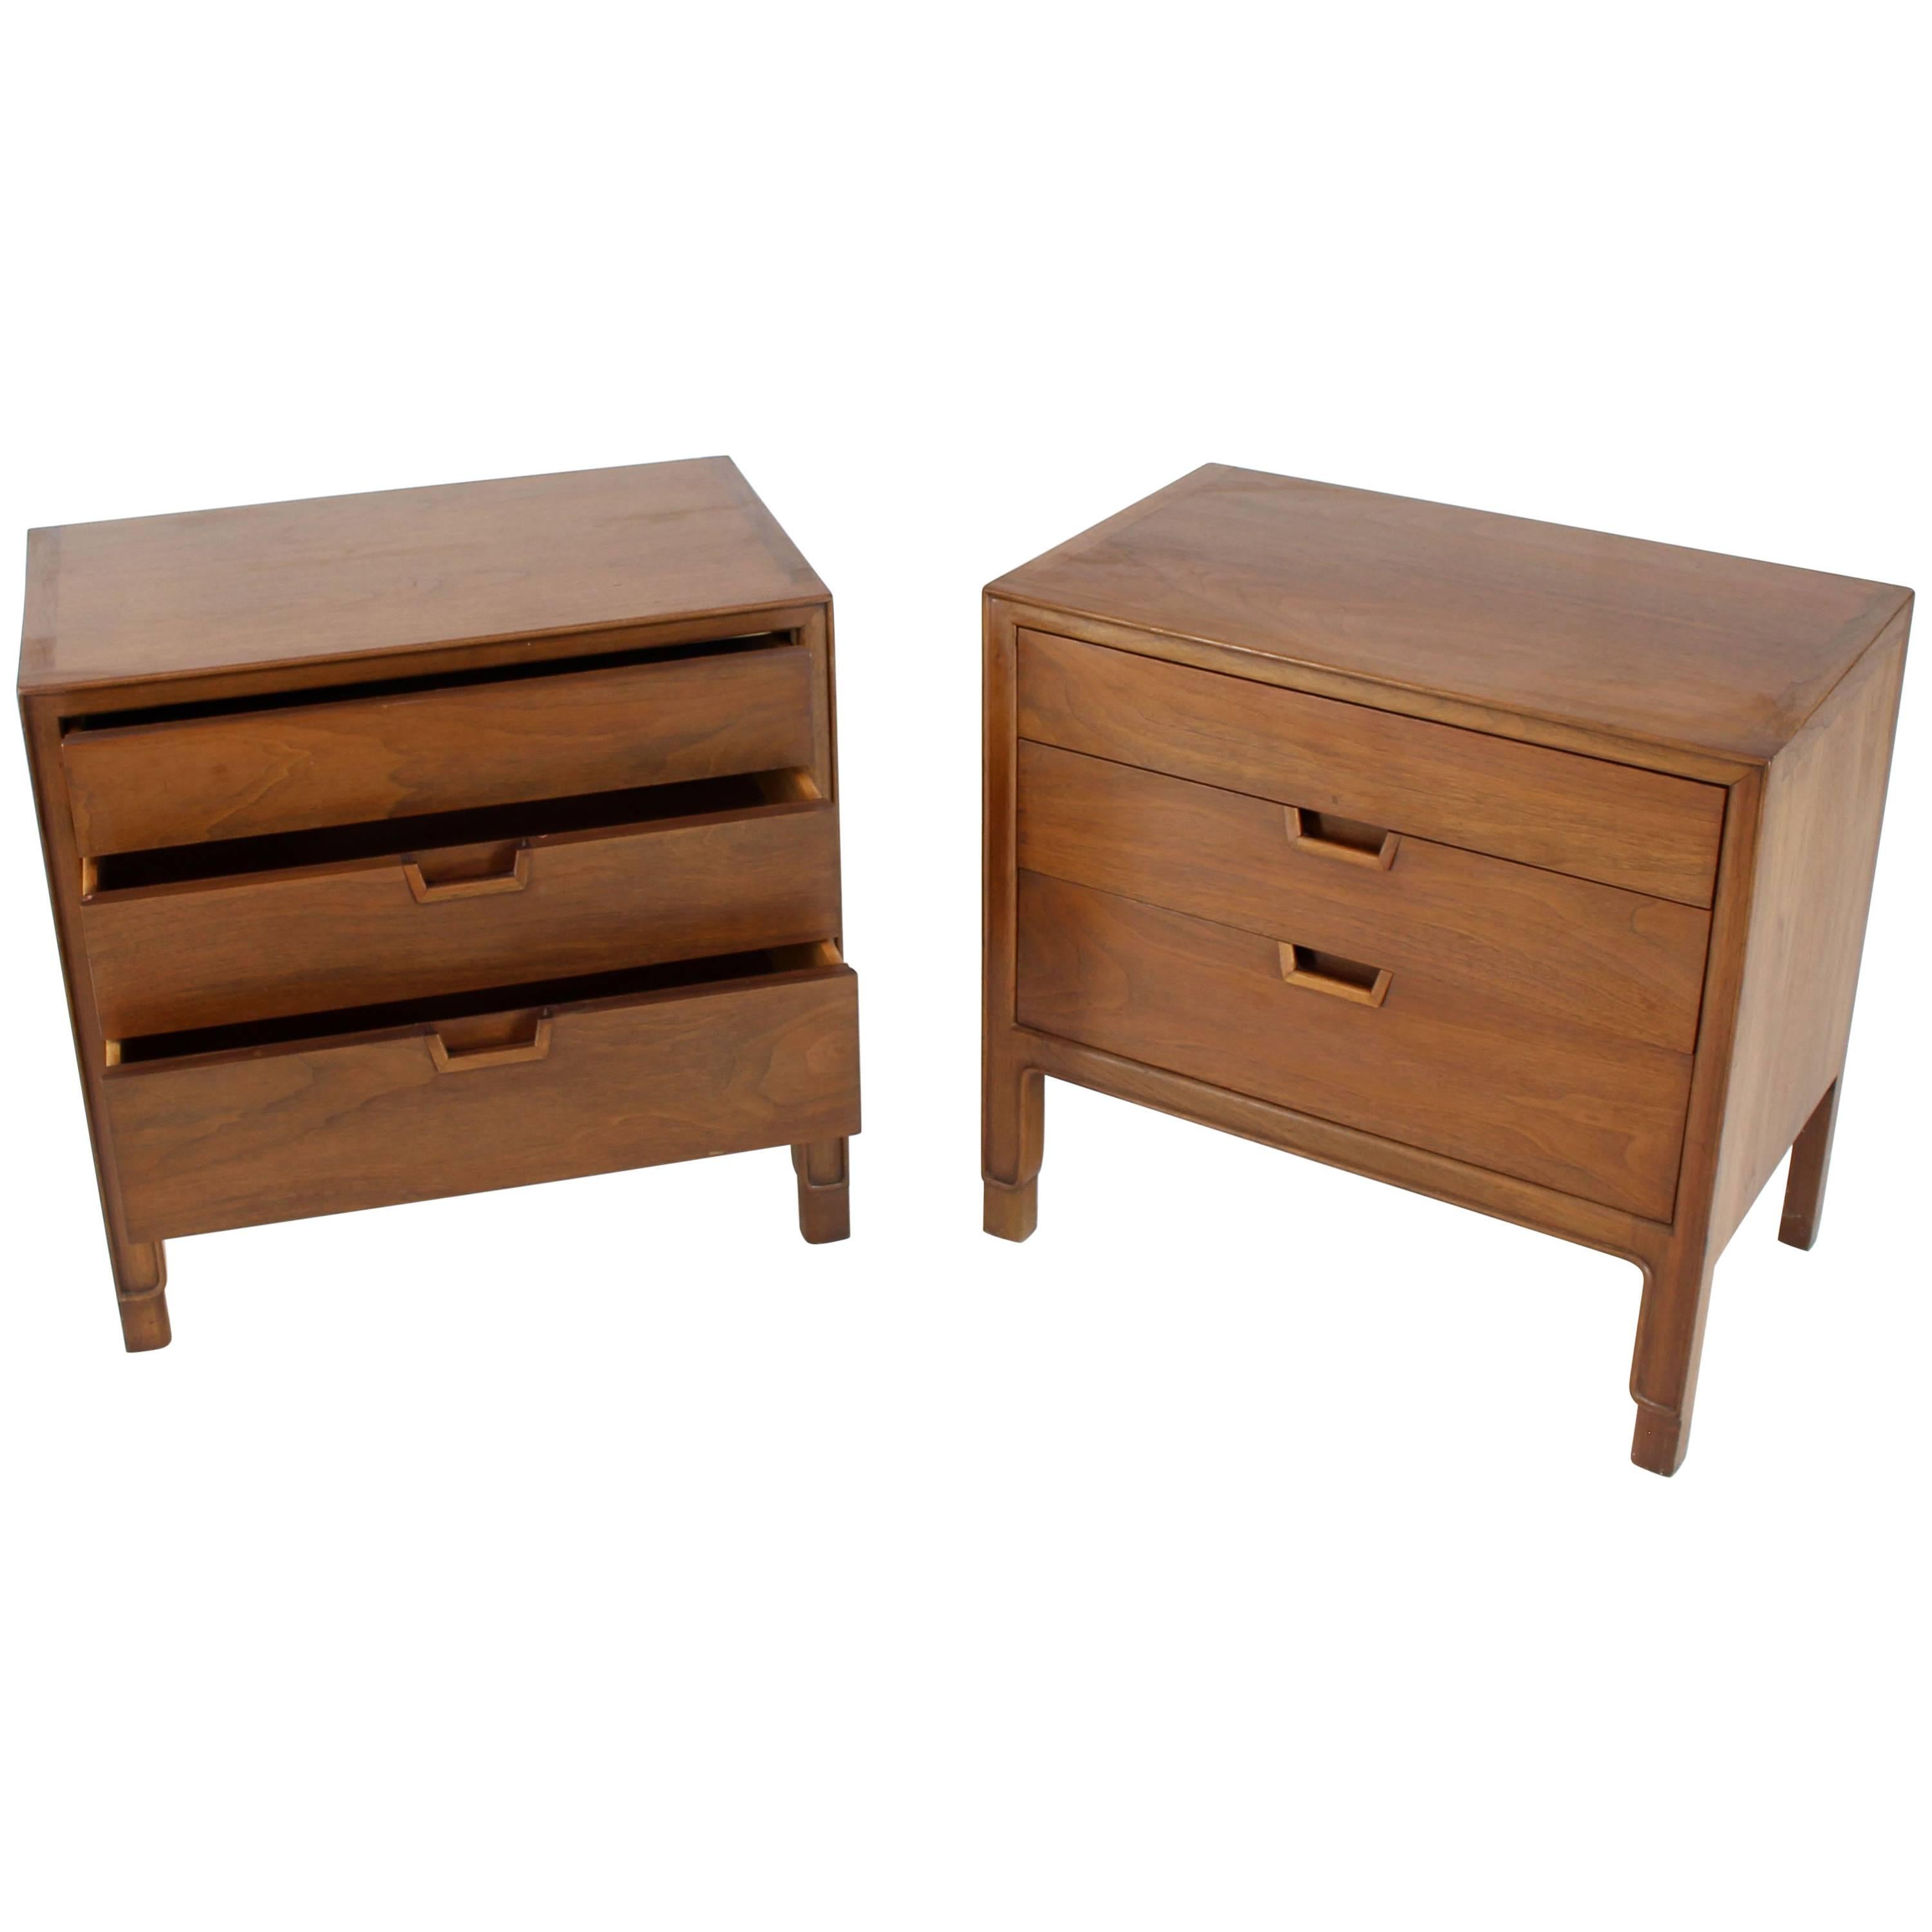 Pair of Walnut Three-Drawer Nightstands End Tables